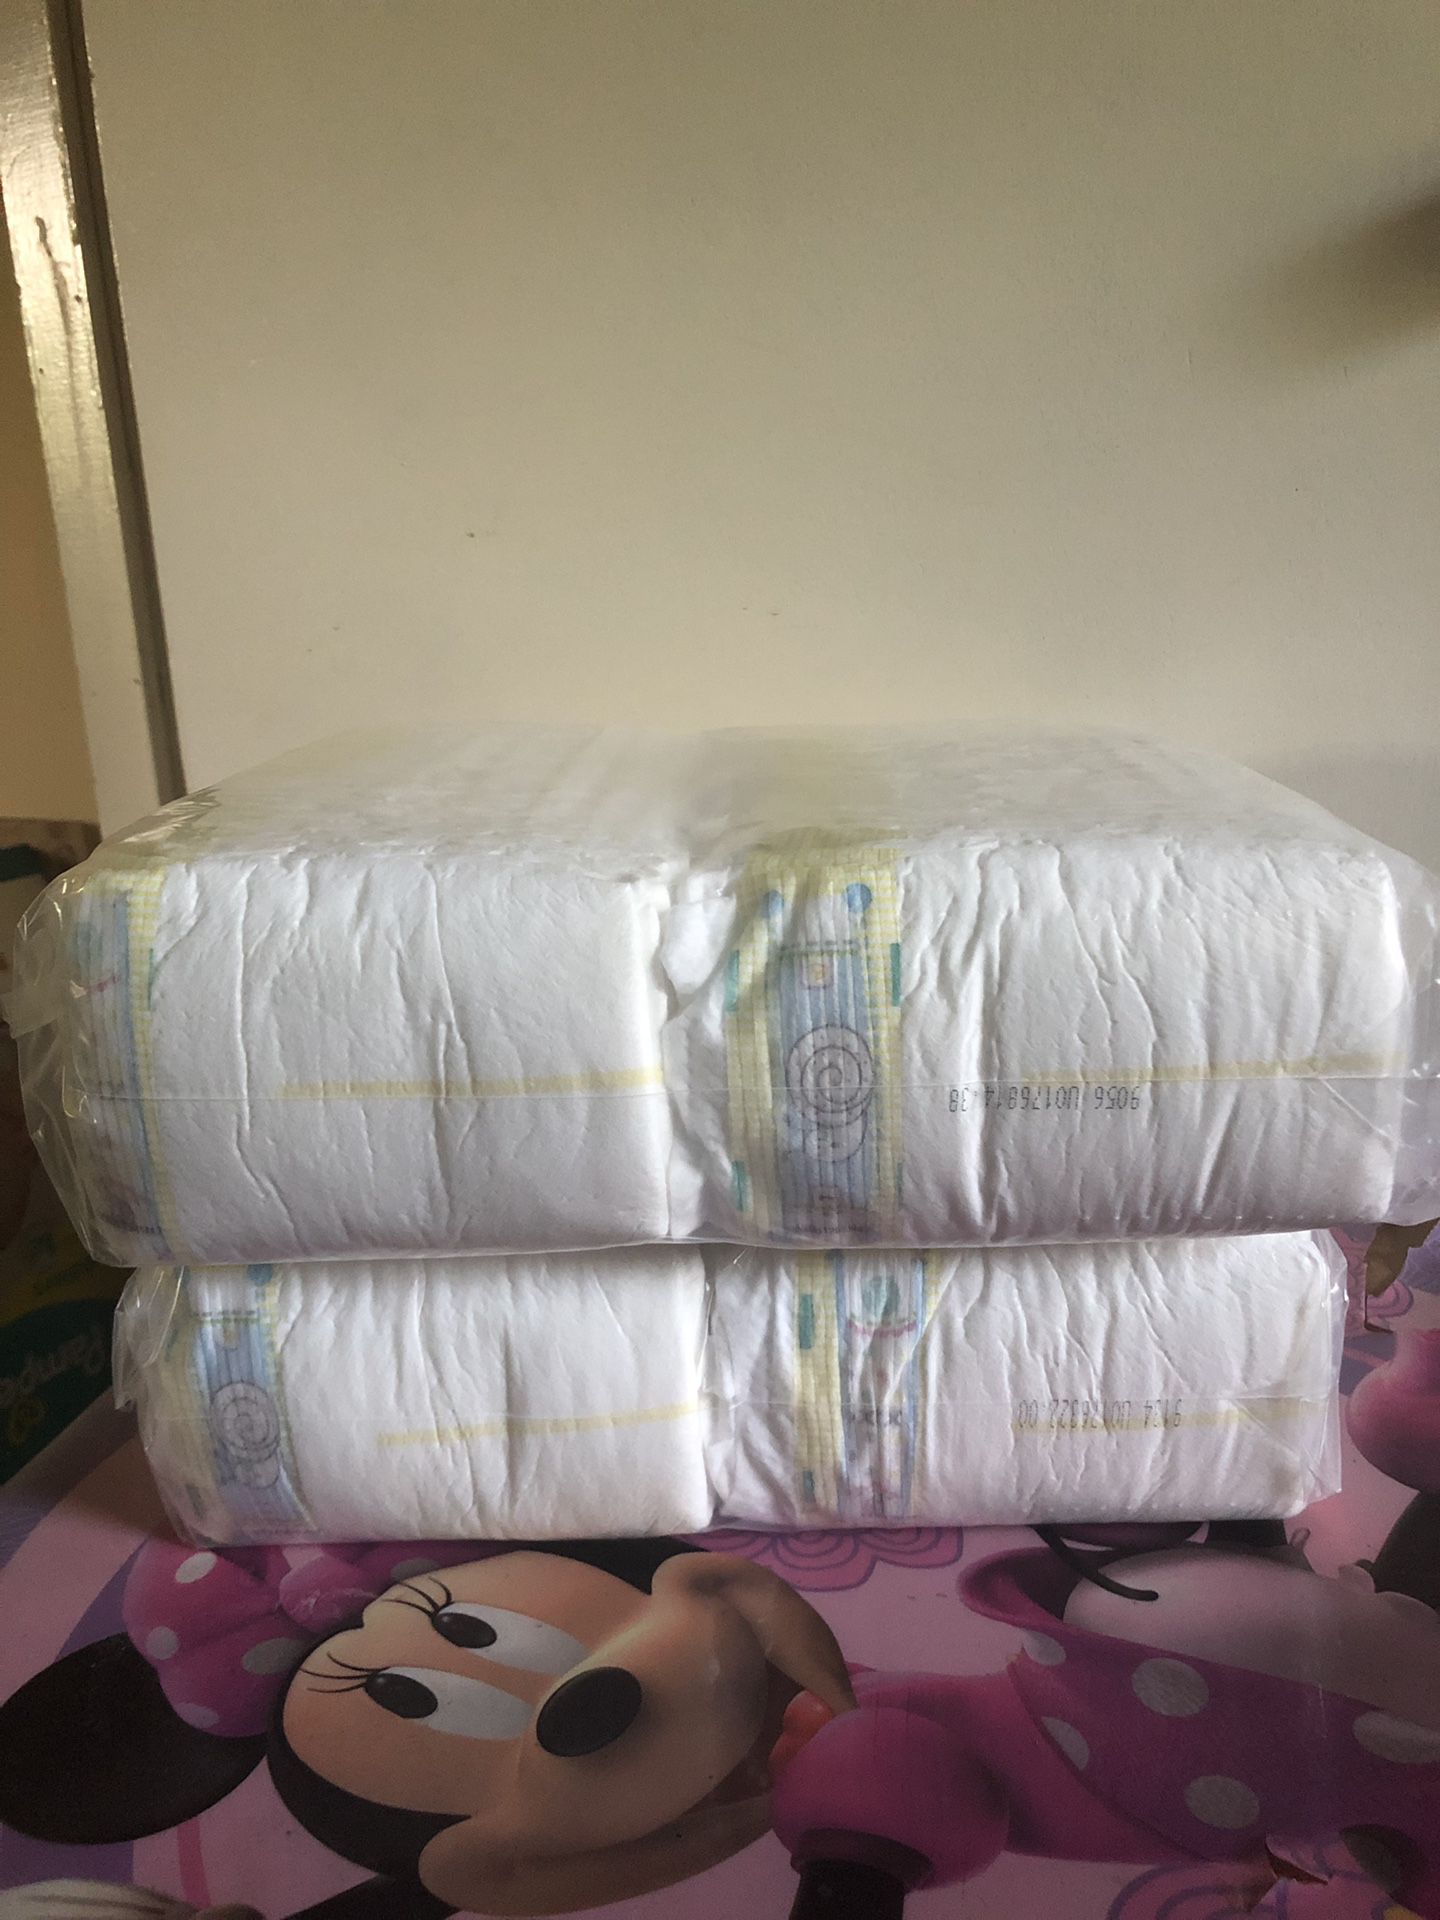 Pampers swaddlers size 2 (116 DIAPERS) - -$25 FOR ALL !!